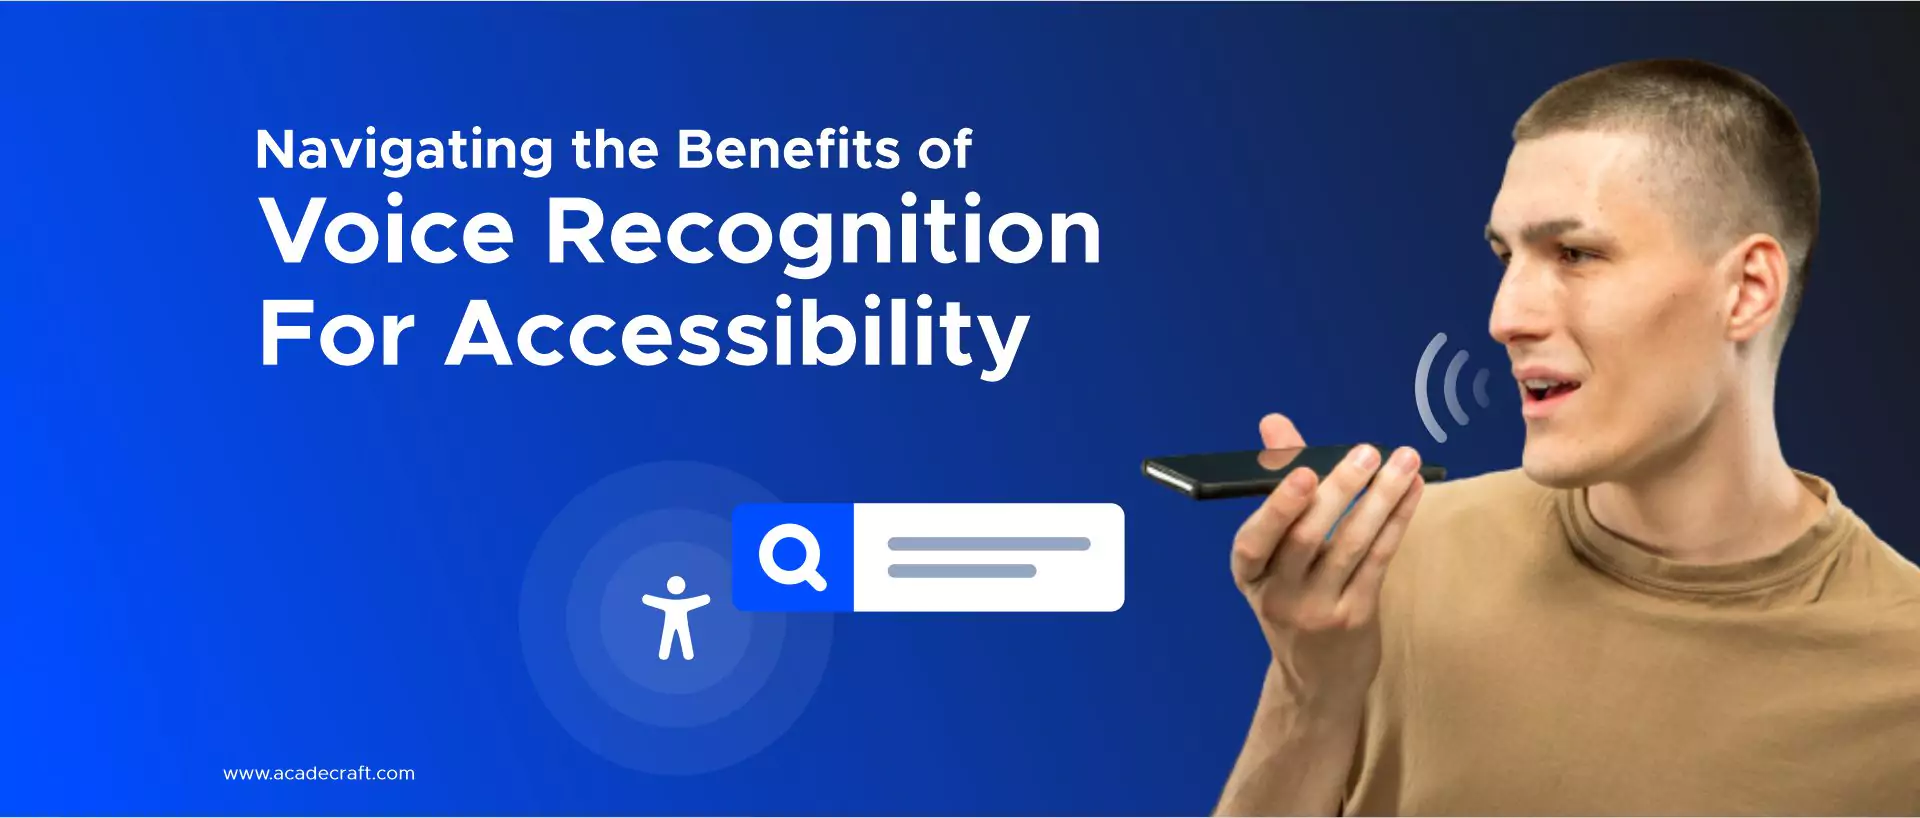 Navigating the Benefits of Voice Recognition For Accessibility